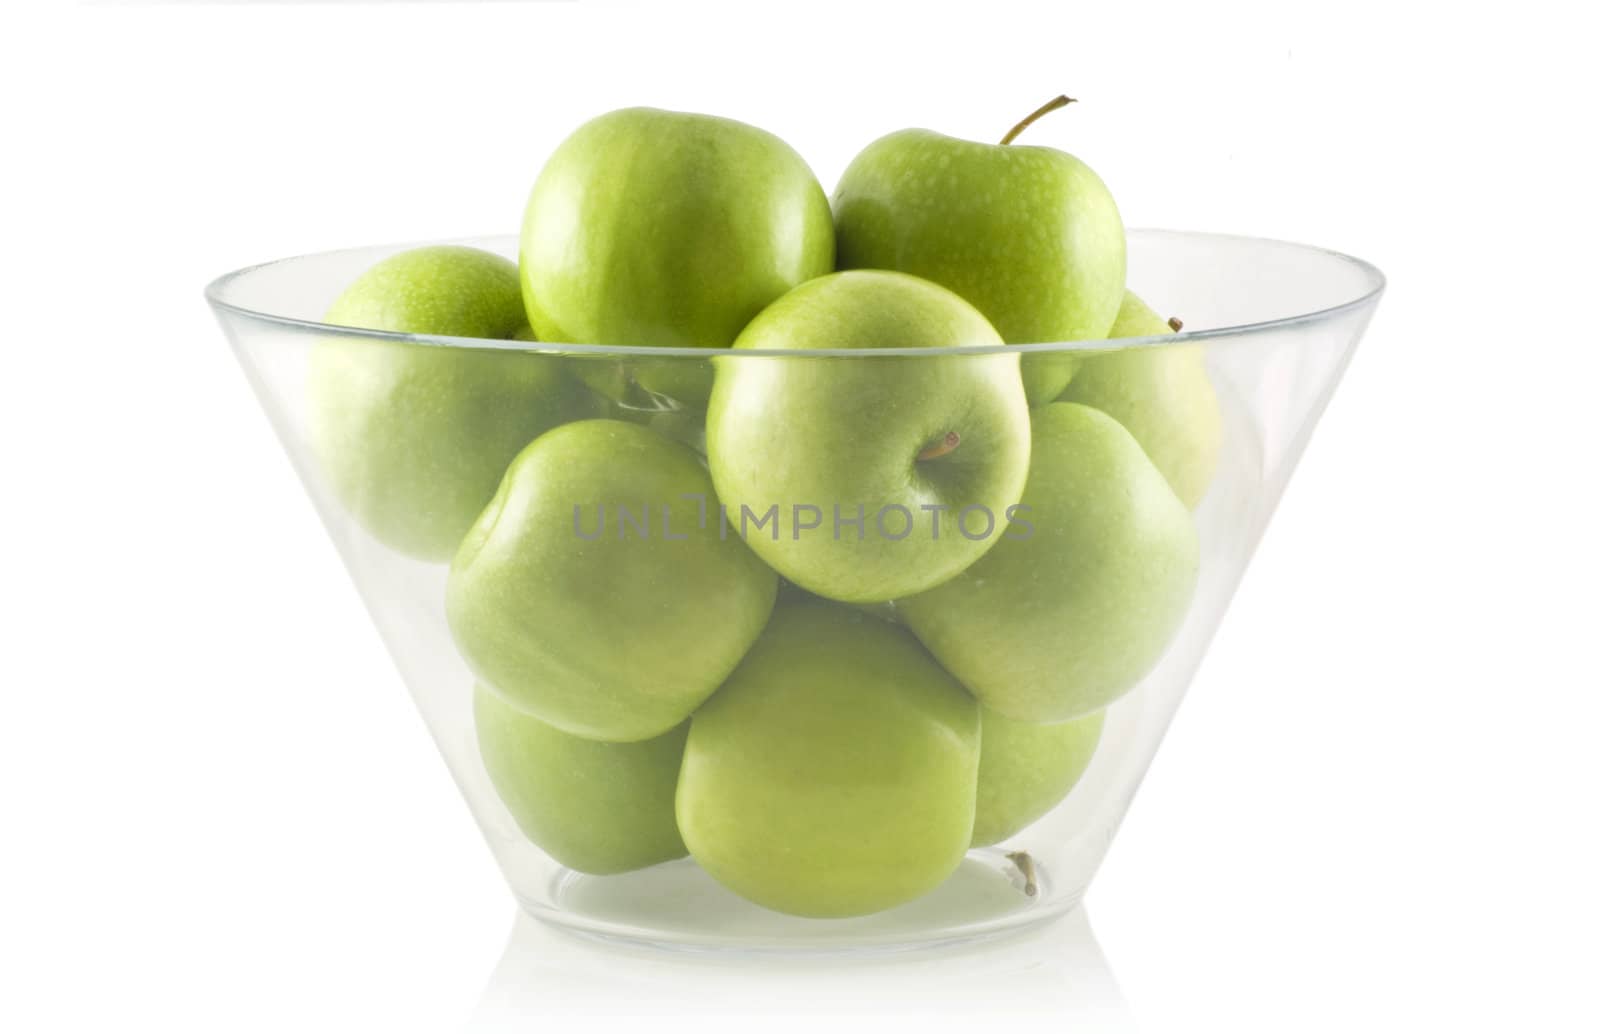 Glass bowl filled with green apples, isolated on white.